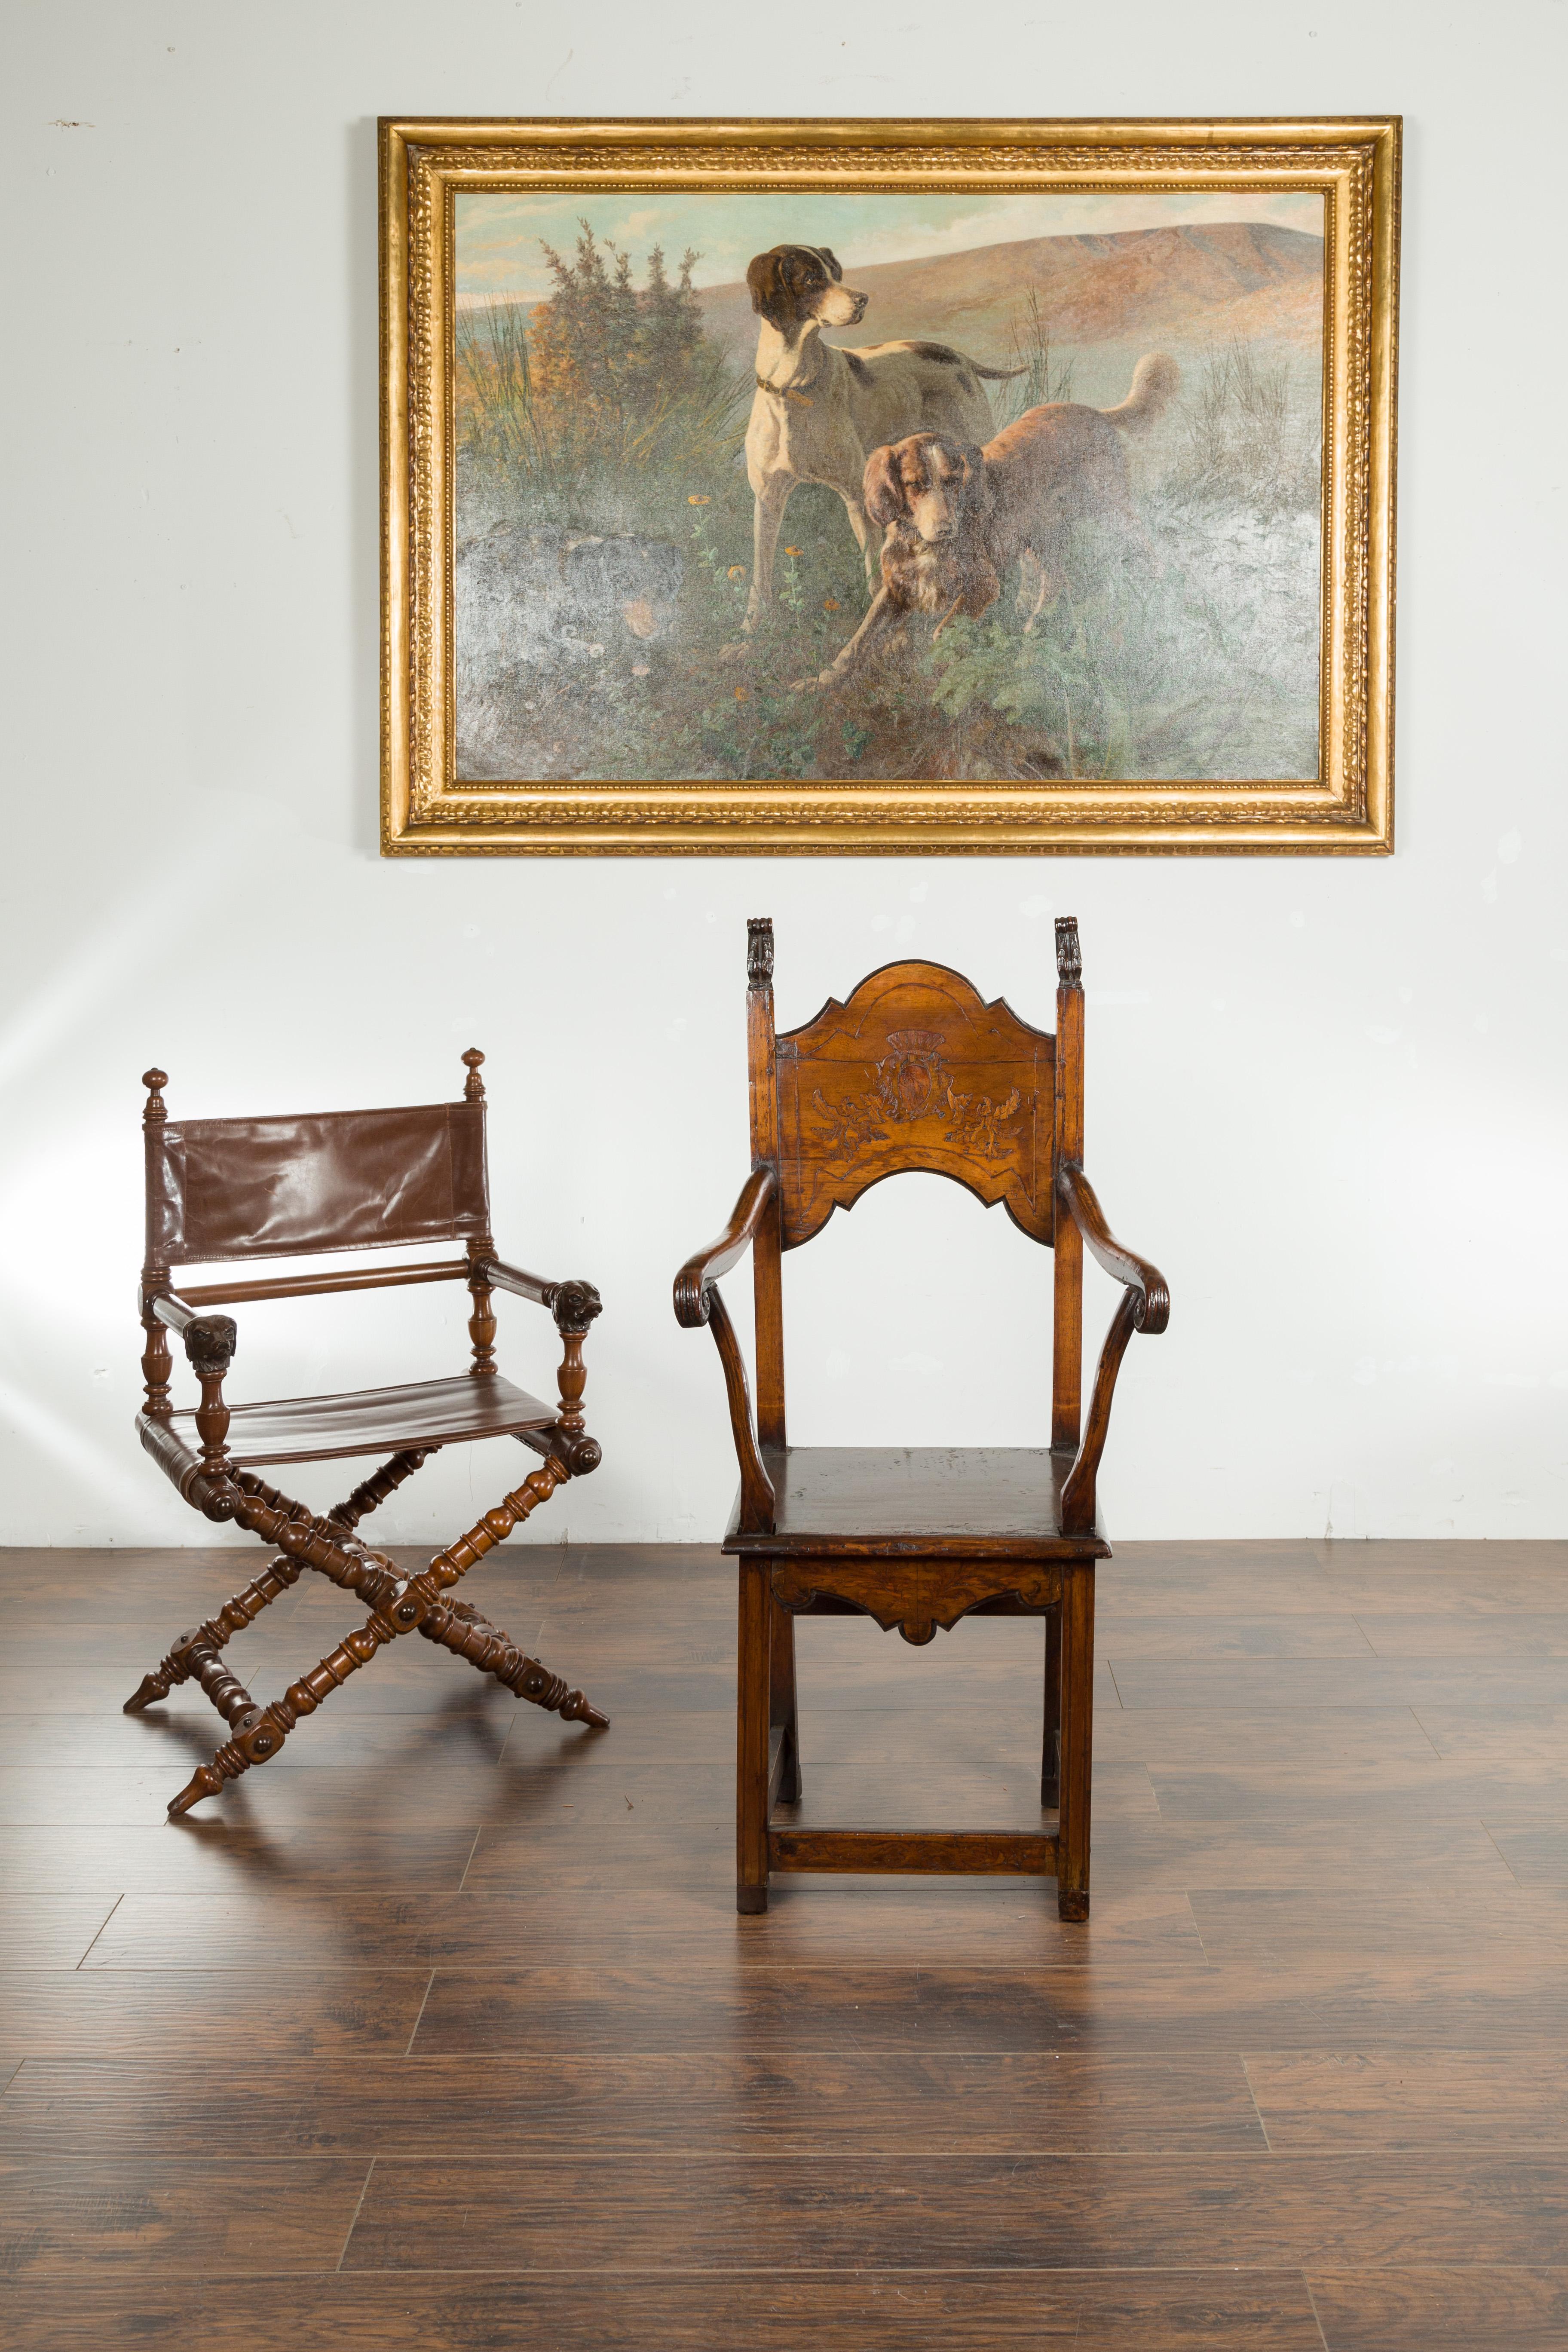 An English Georgian period tall wooden chair from the early 19th century, with carved cartouche and scrolling arms. Created in England during the first quarter of the 19th century, this wooden chair charms us with its tall back, carved with foliage